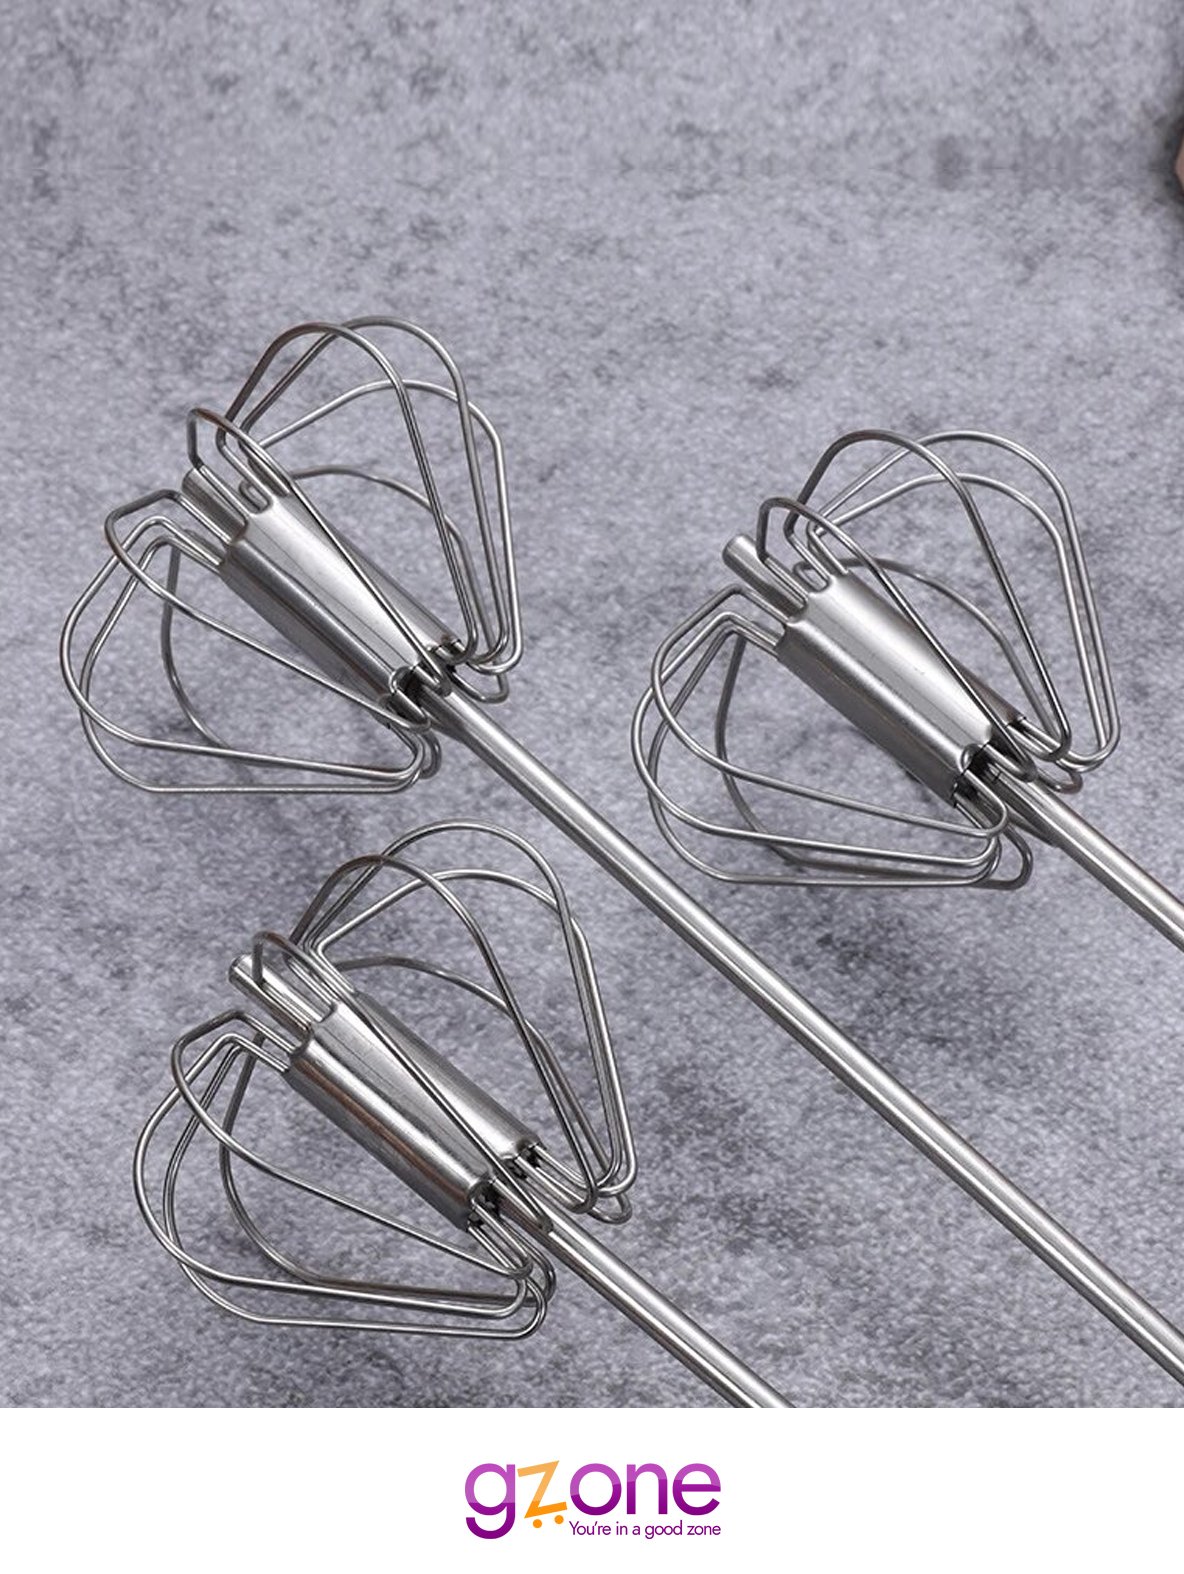 Semi Automatic Mixer Egg Beater Manual Self Turning Stainless Steel Easy Whisk Hand Blender Egg Cream Stirring Kitchen Tools